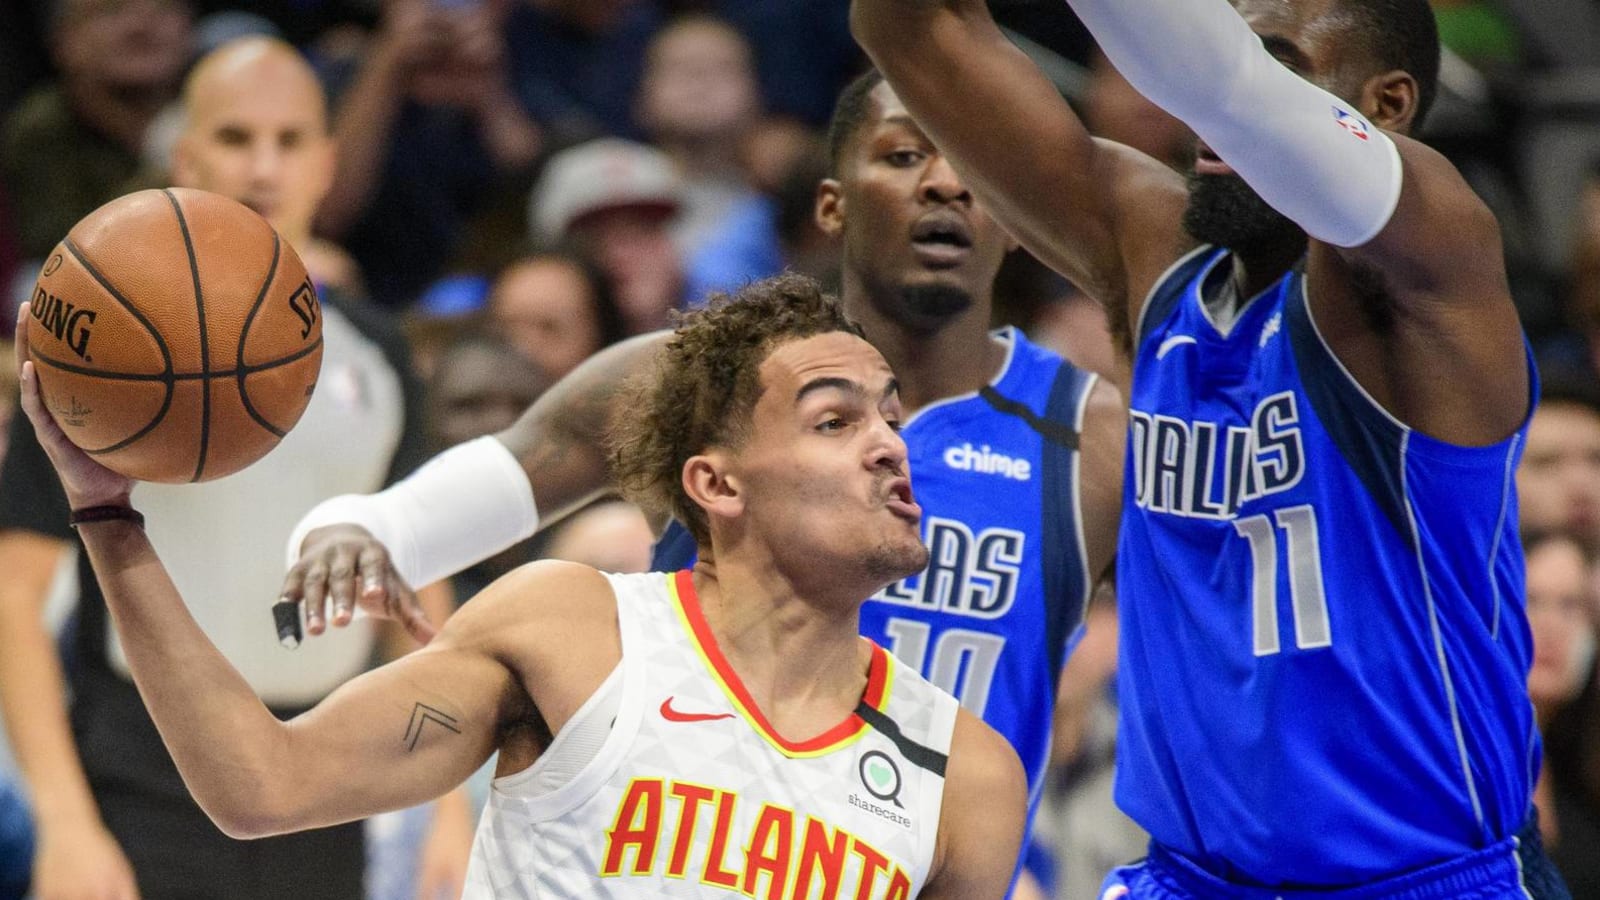 Atlanta's 'Ice' Trae, three others in East melt in this hot spotlight